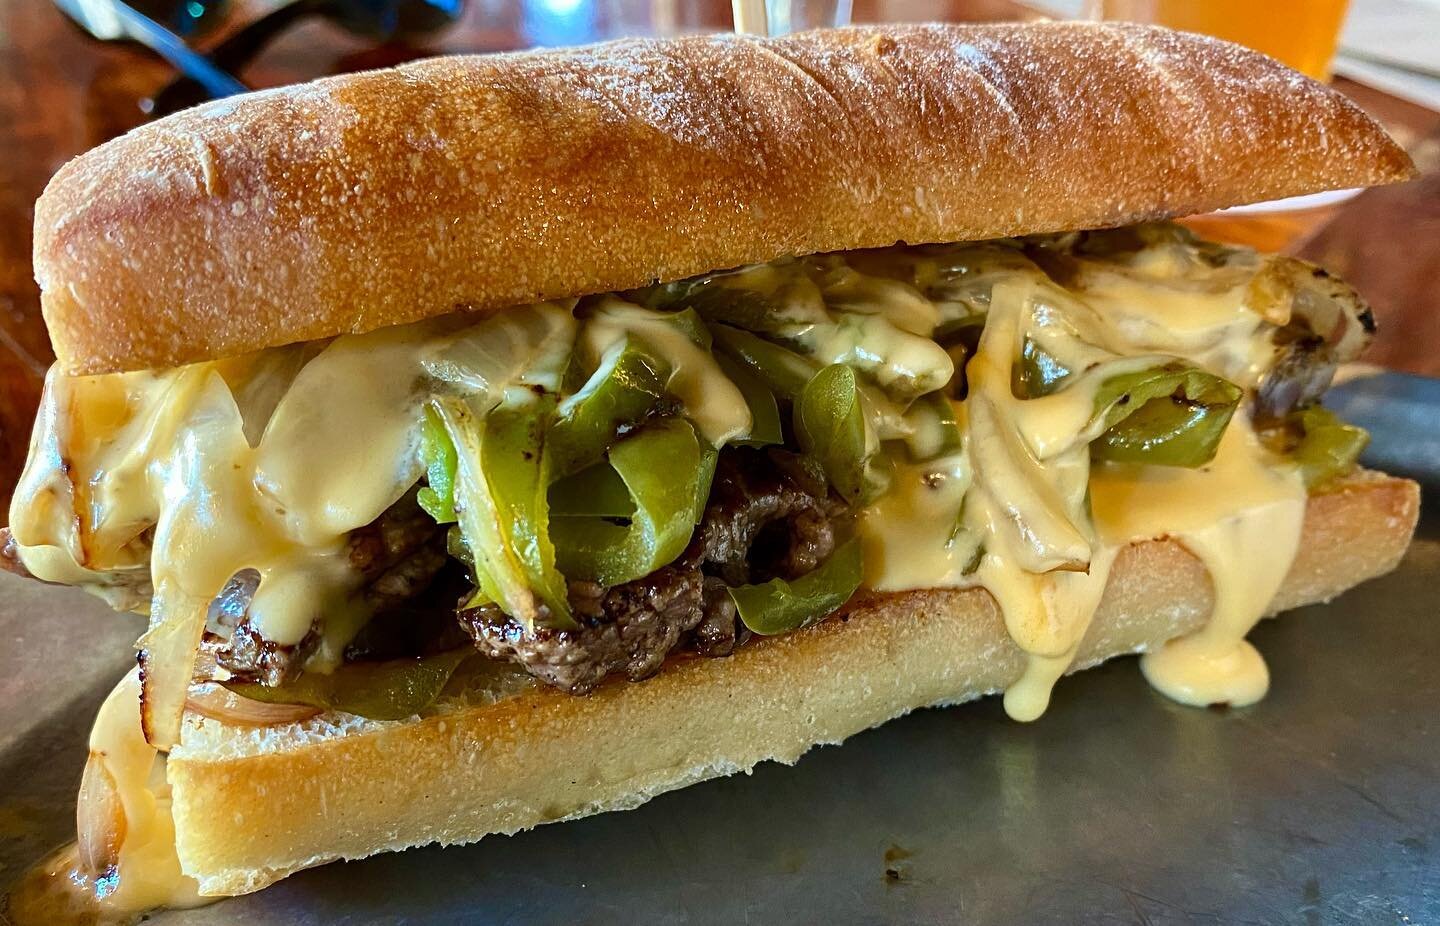 The neatest cheesesteak sandwich I&rsquo;ve ever had for sure at Elysium Brewing
,
,
,
#sandwich #cheesesteak #elysiumbrewing #seattle #steak #cheese #dinner #greenpeppers #onions #food #placesiveeaten